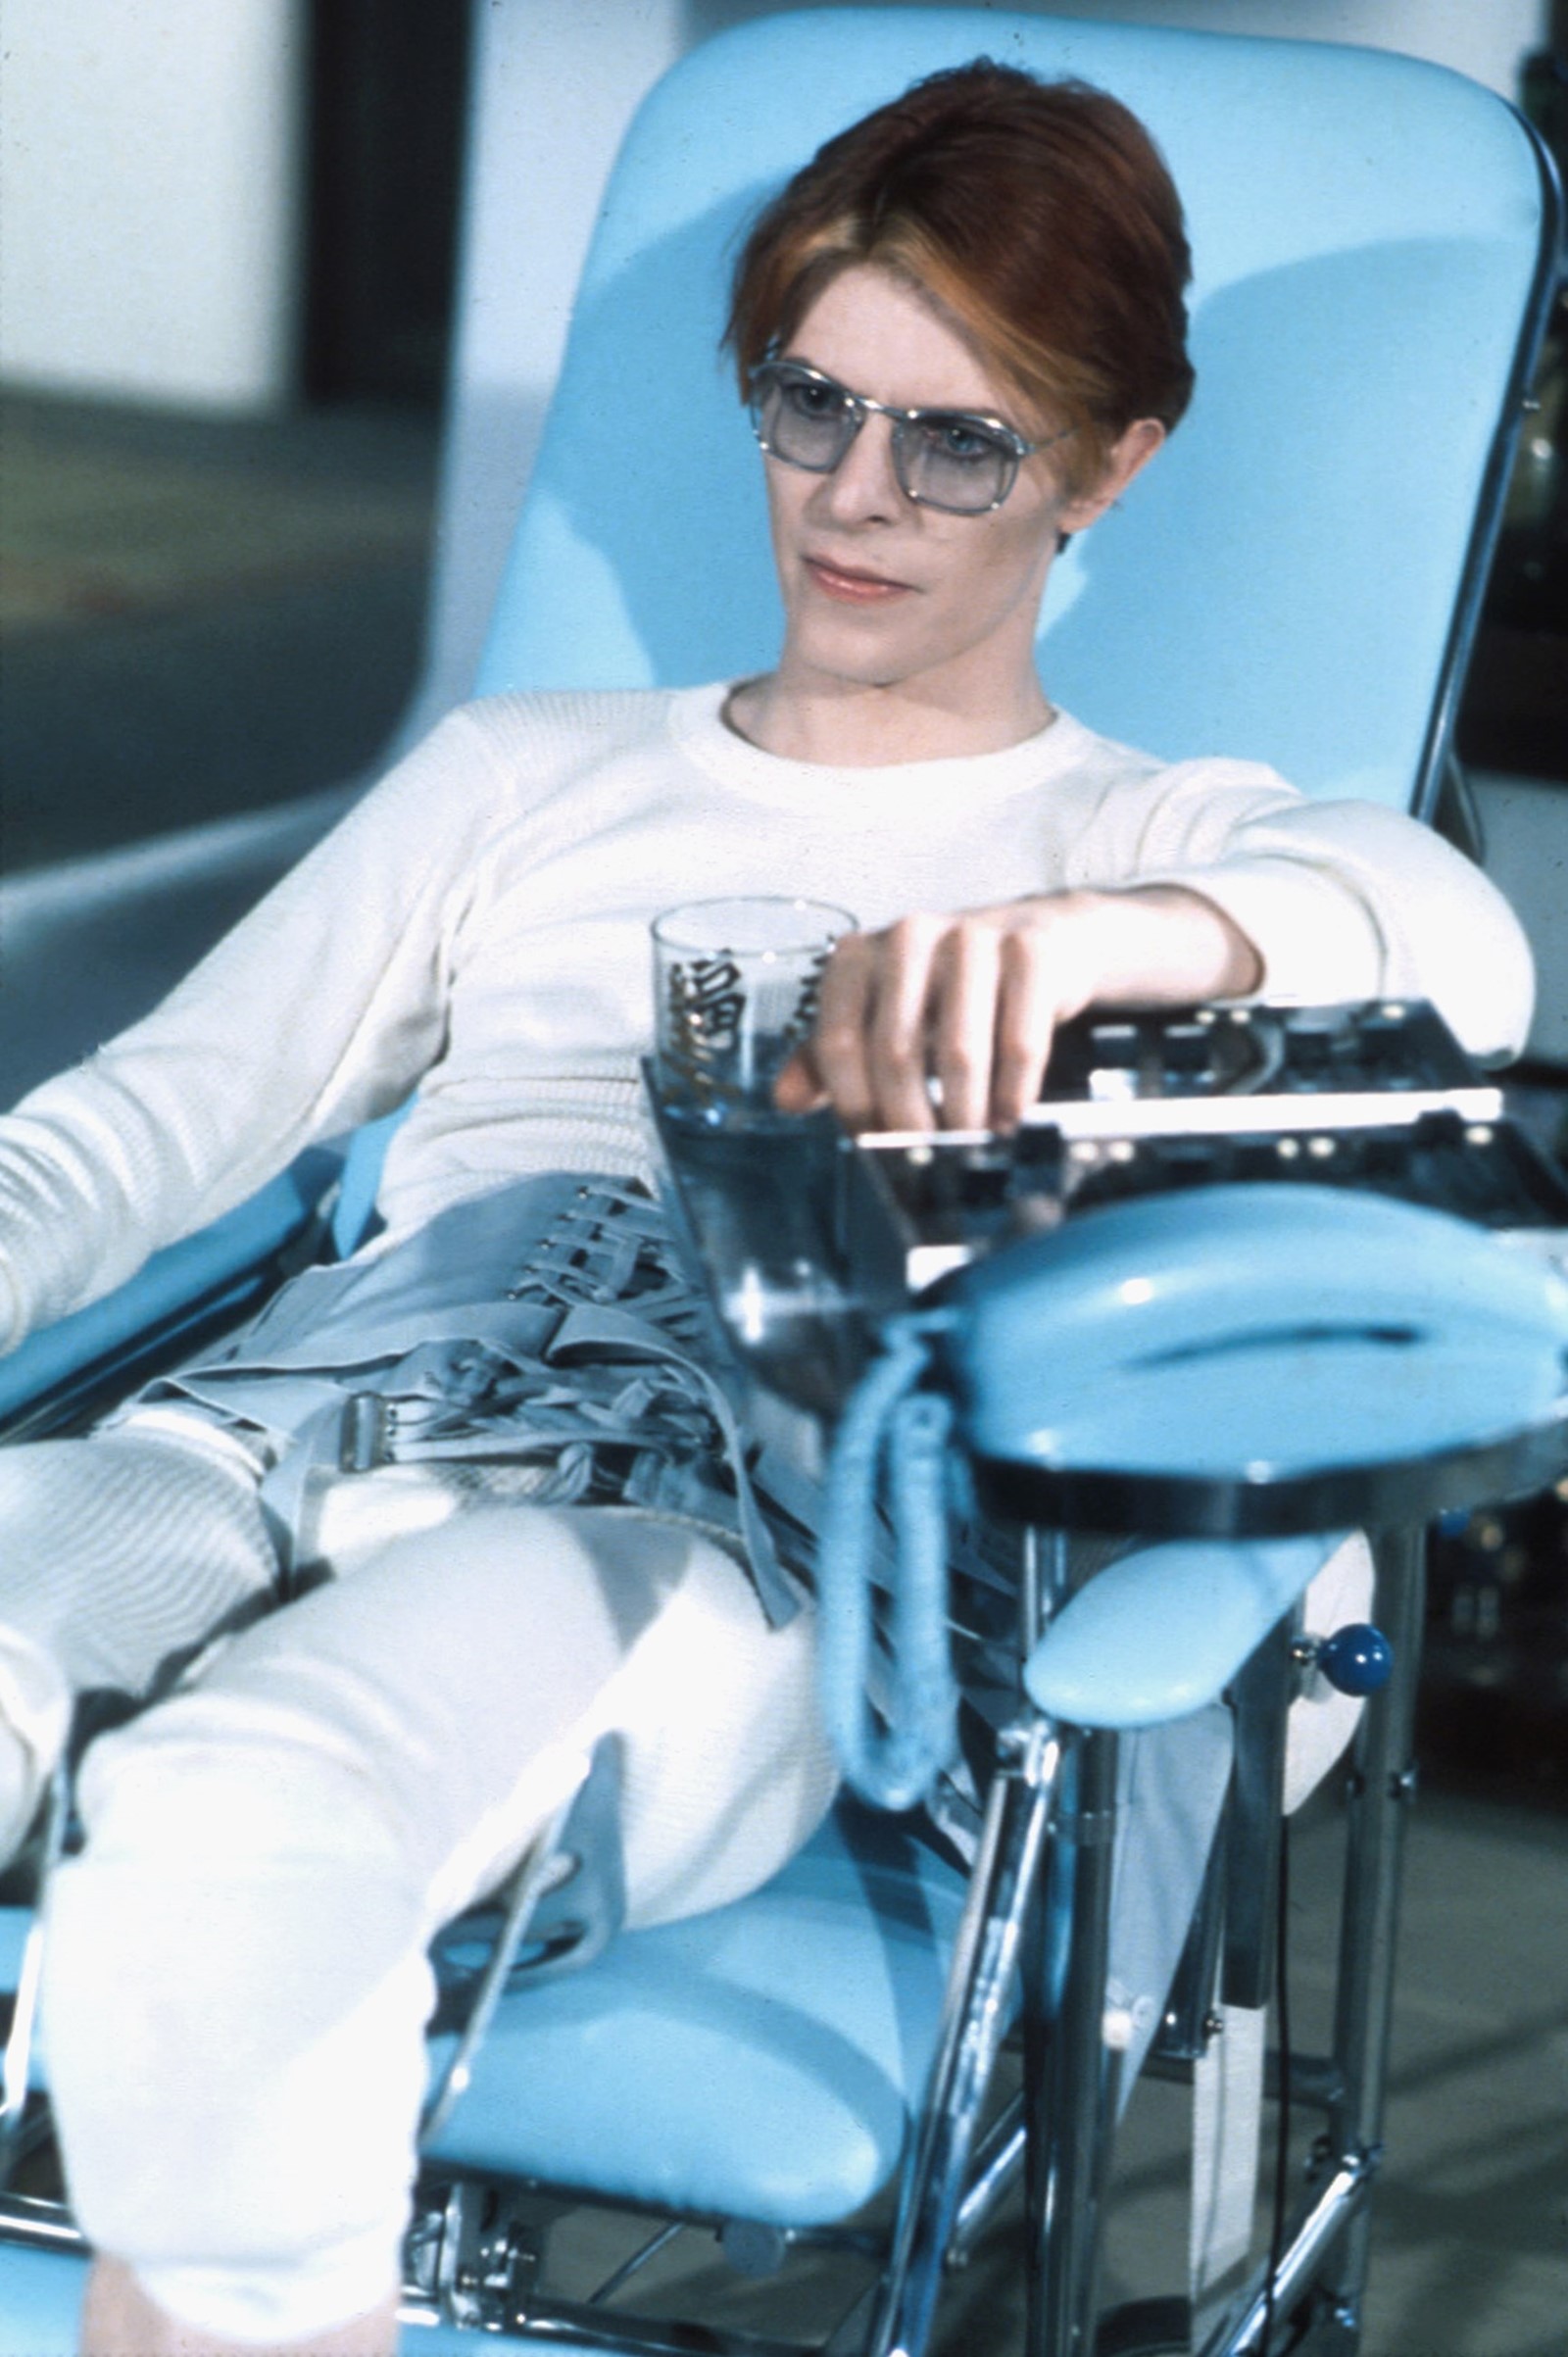 Bowie on the set of The Man Who Fell to Earth